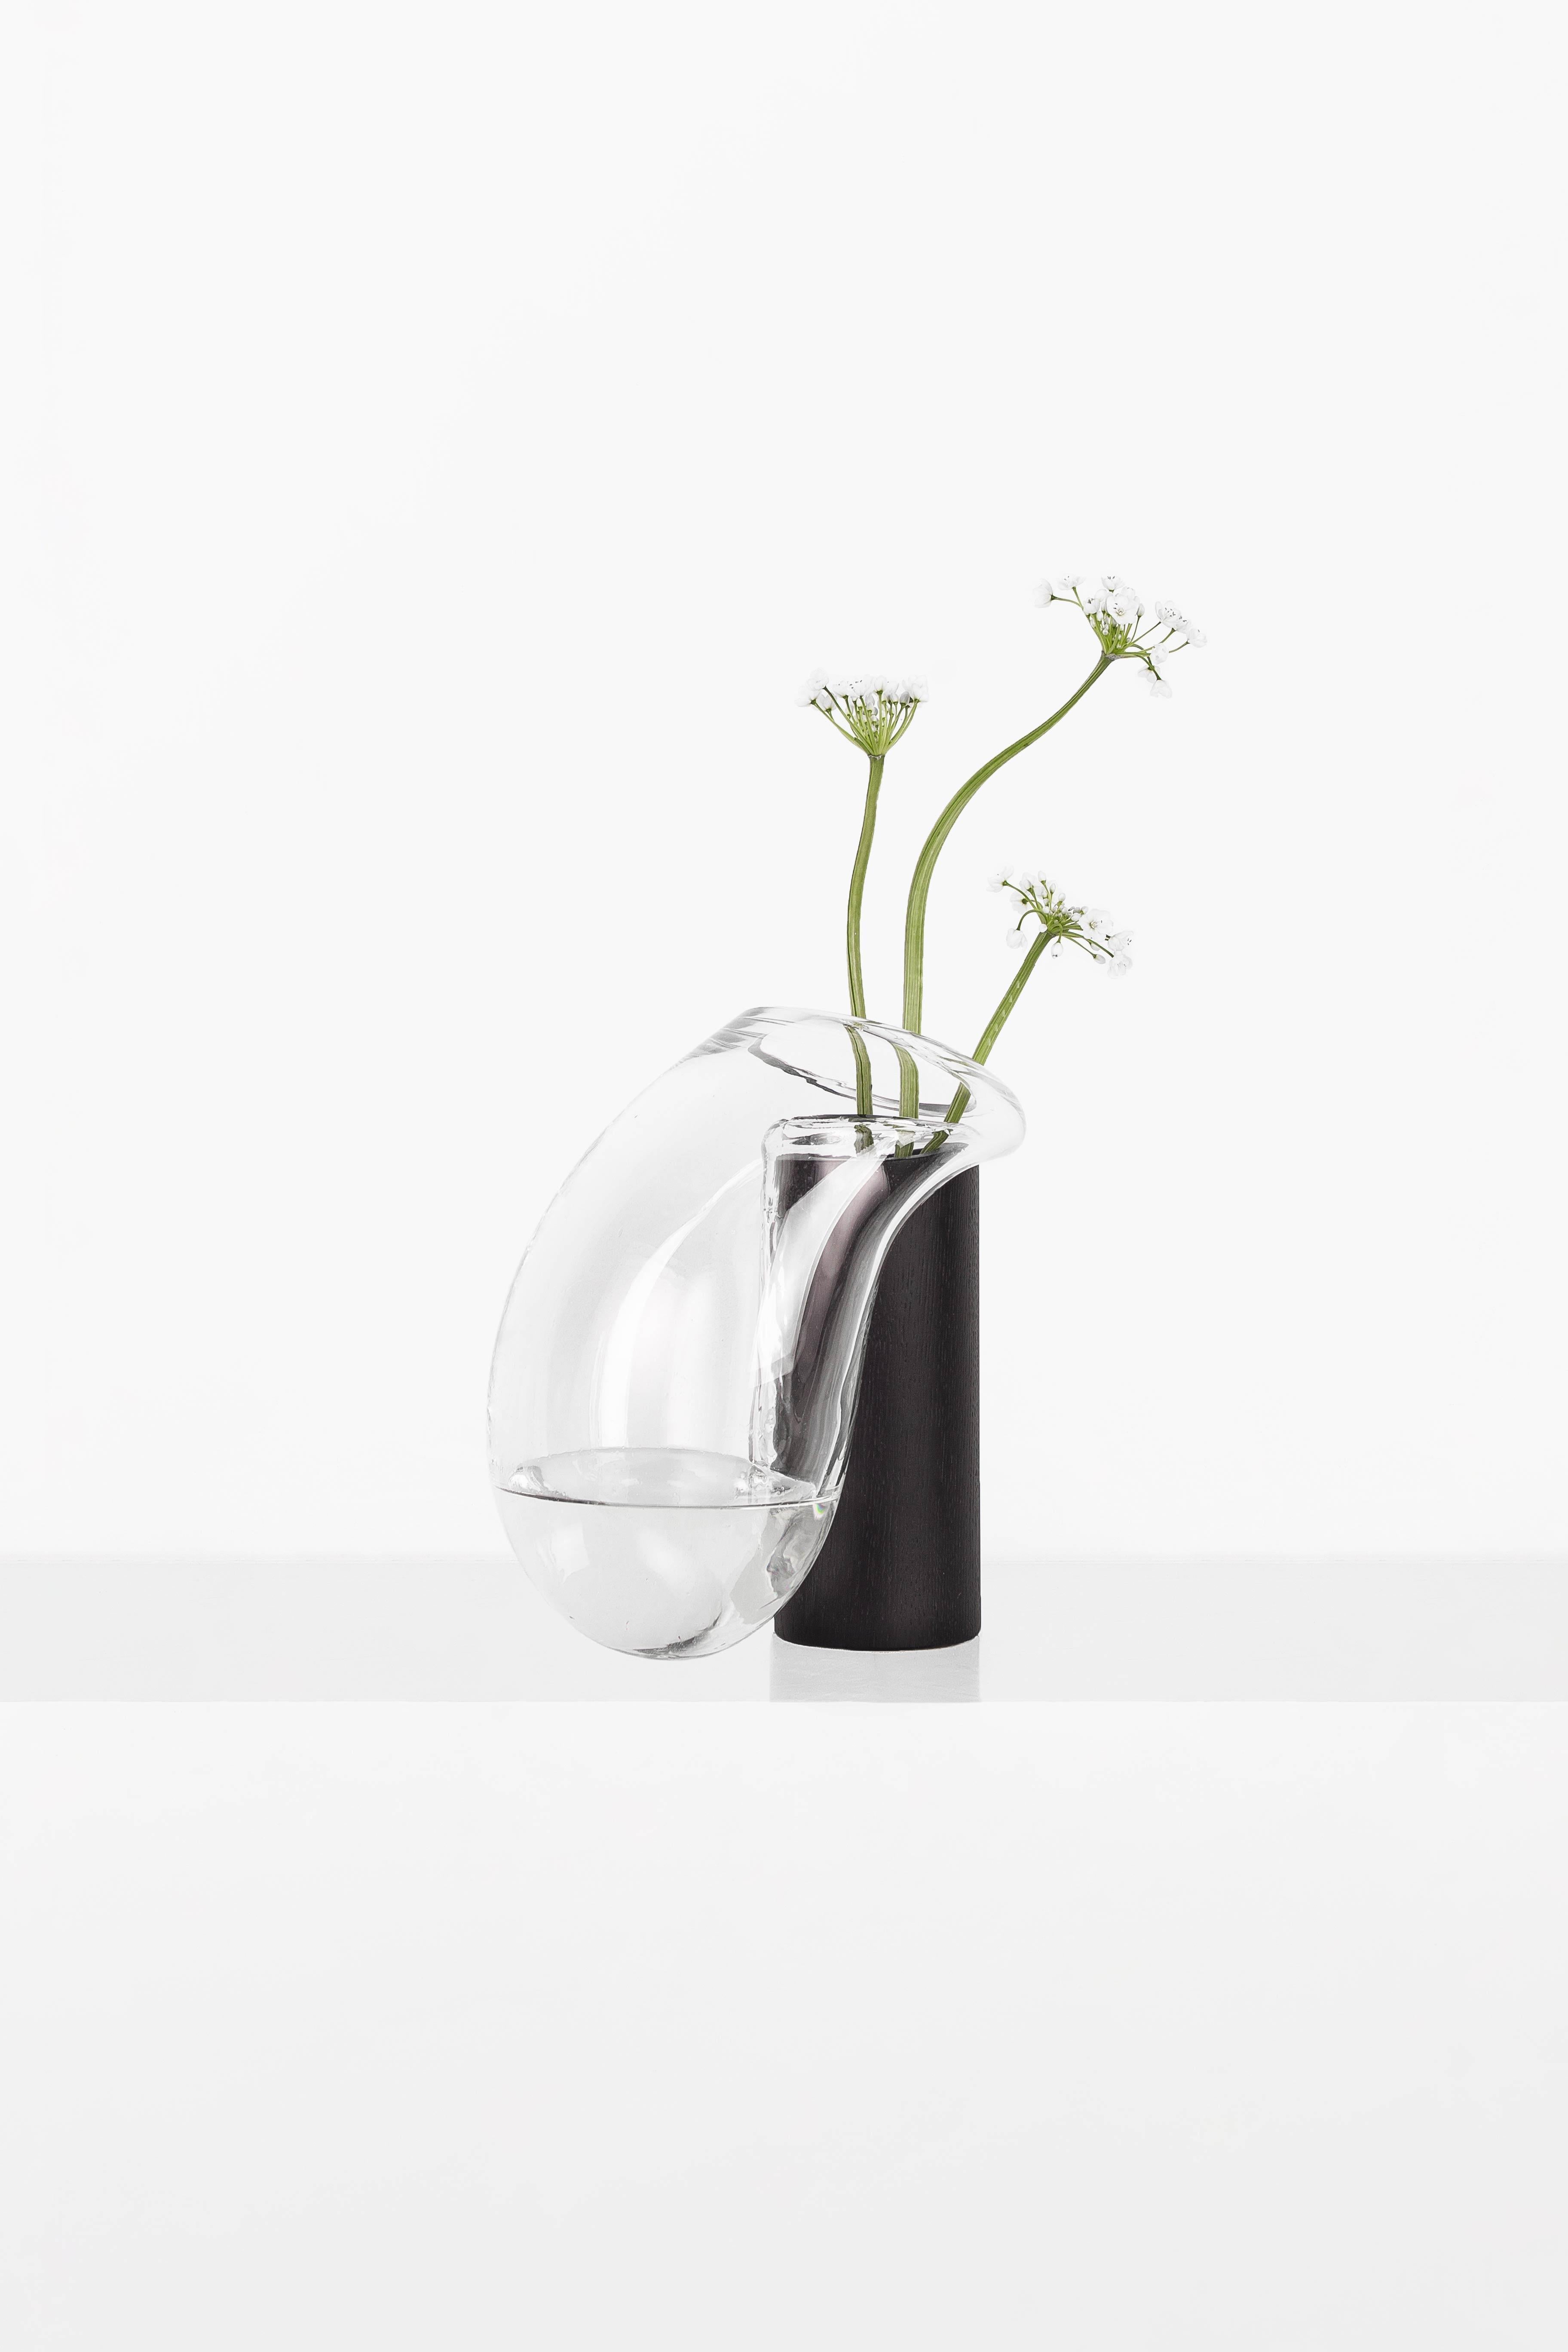 Modern Gutta Boon Vase CS1 by Noom in Blown Transparent Glass and Oak Base 6